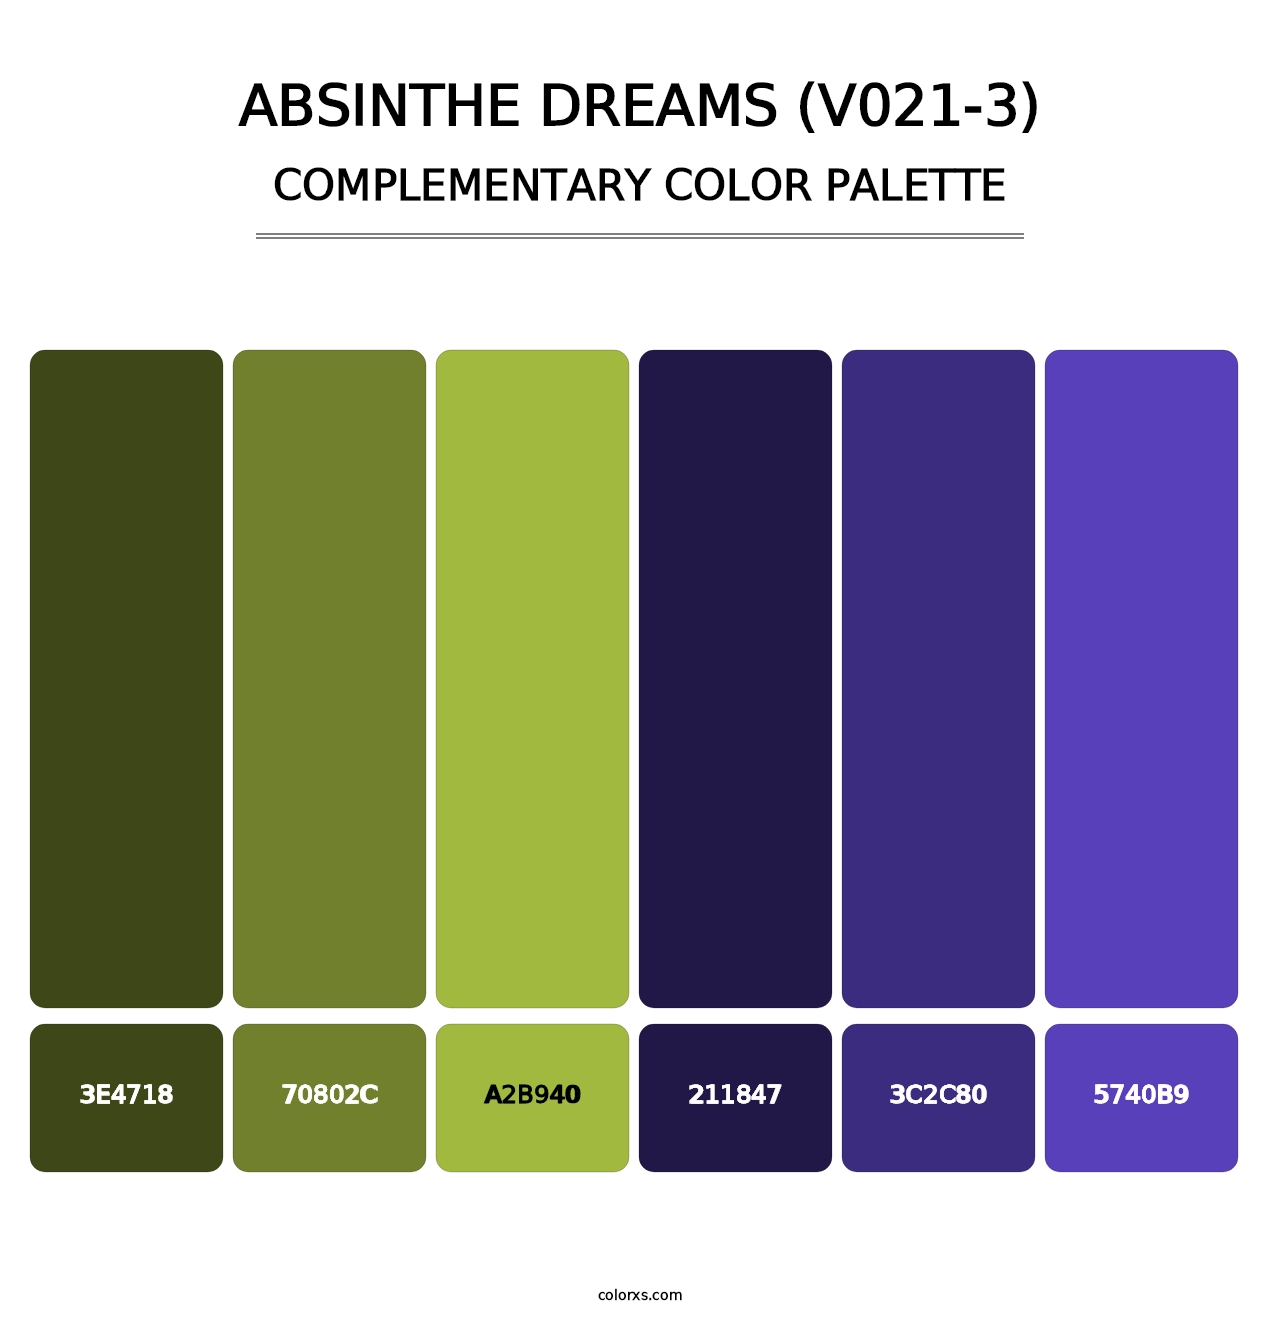 Absinthe Dreams (V021-3) - Complementary Color Palette